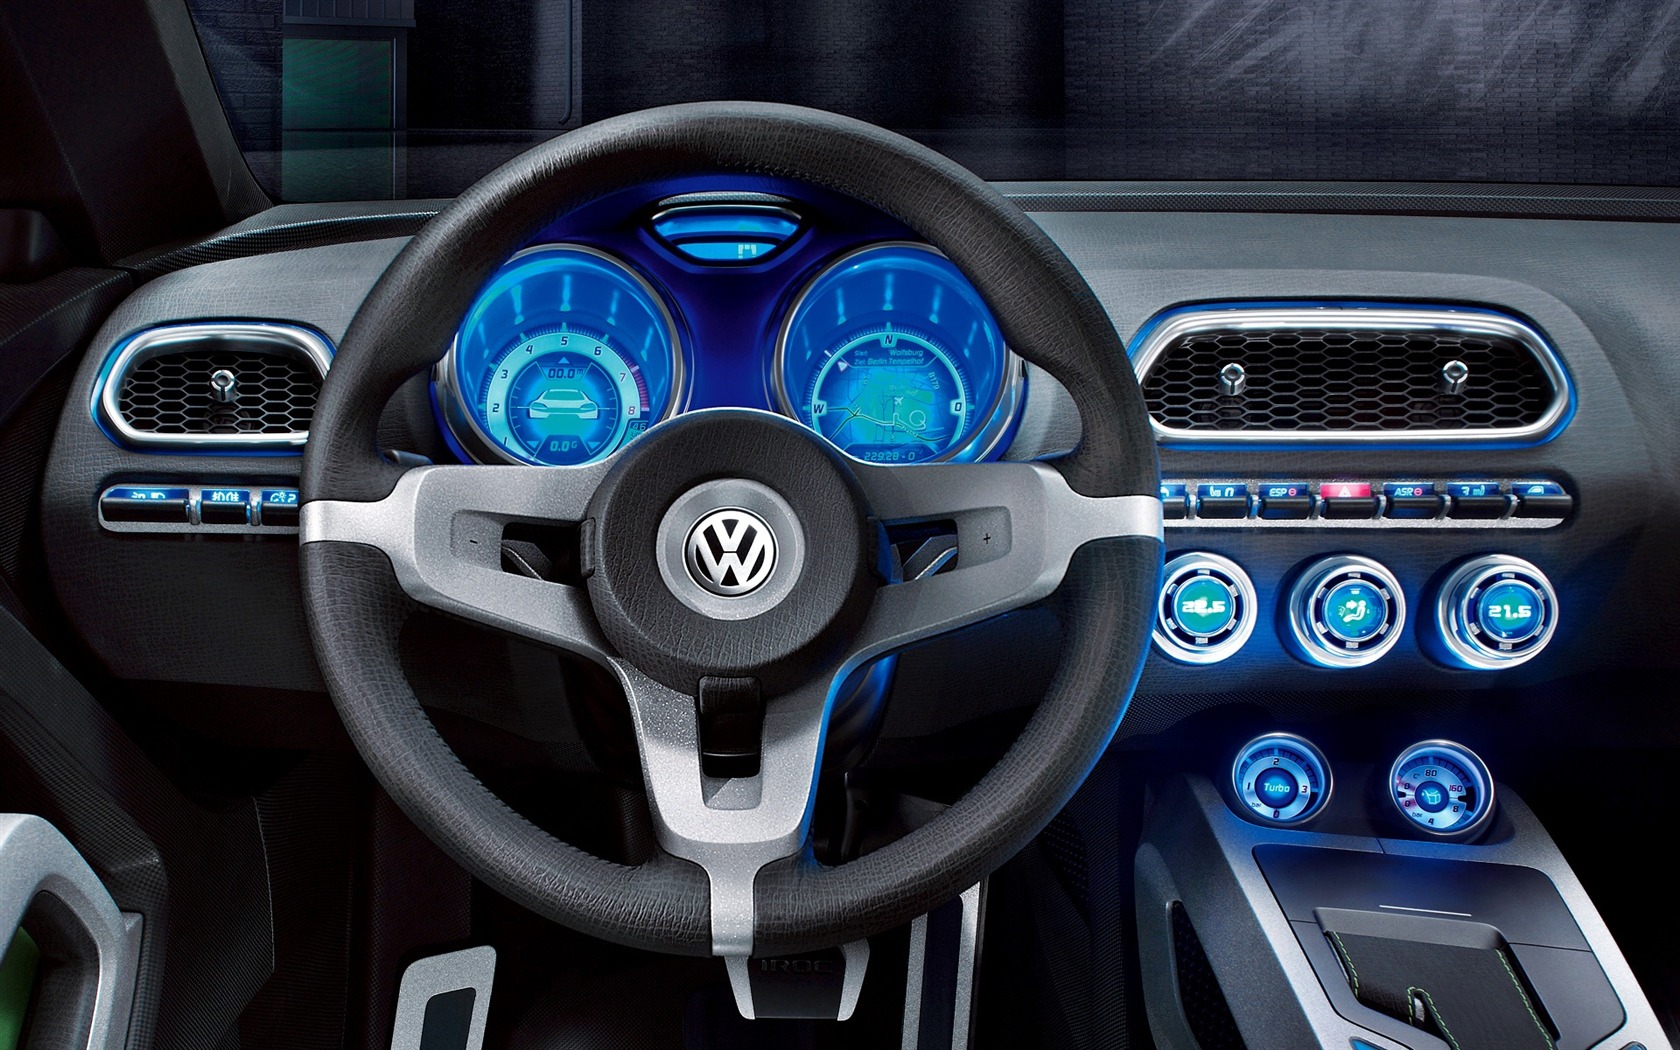 Volkswagen Concept Car tapety (2) #6 - 1680x1050